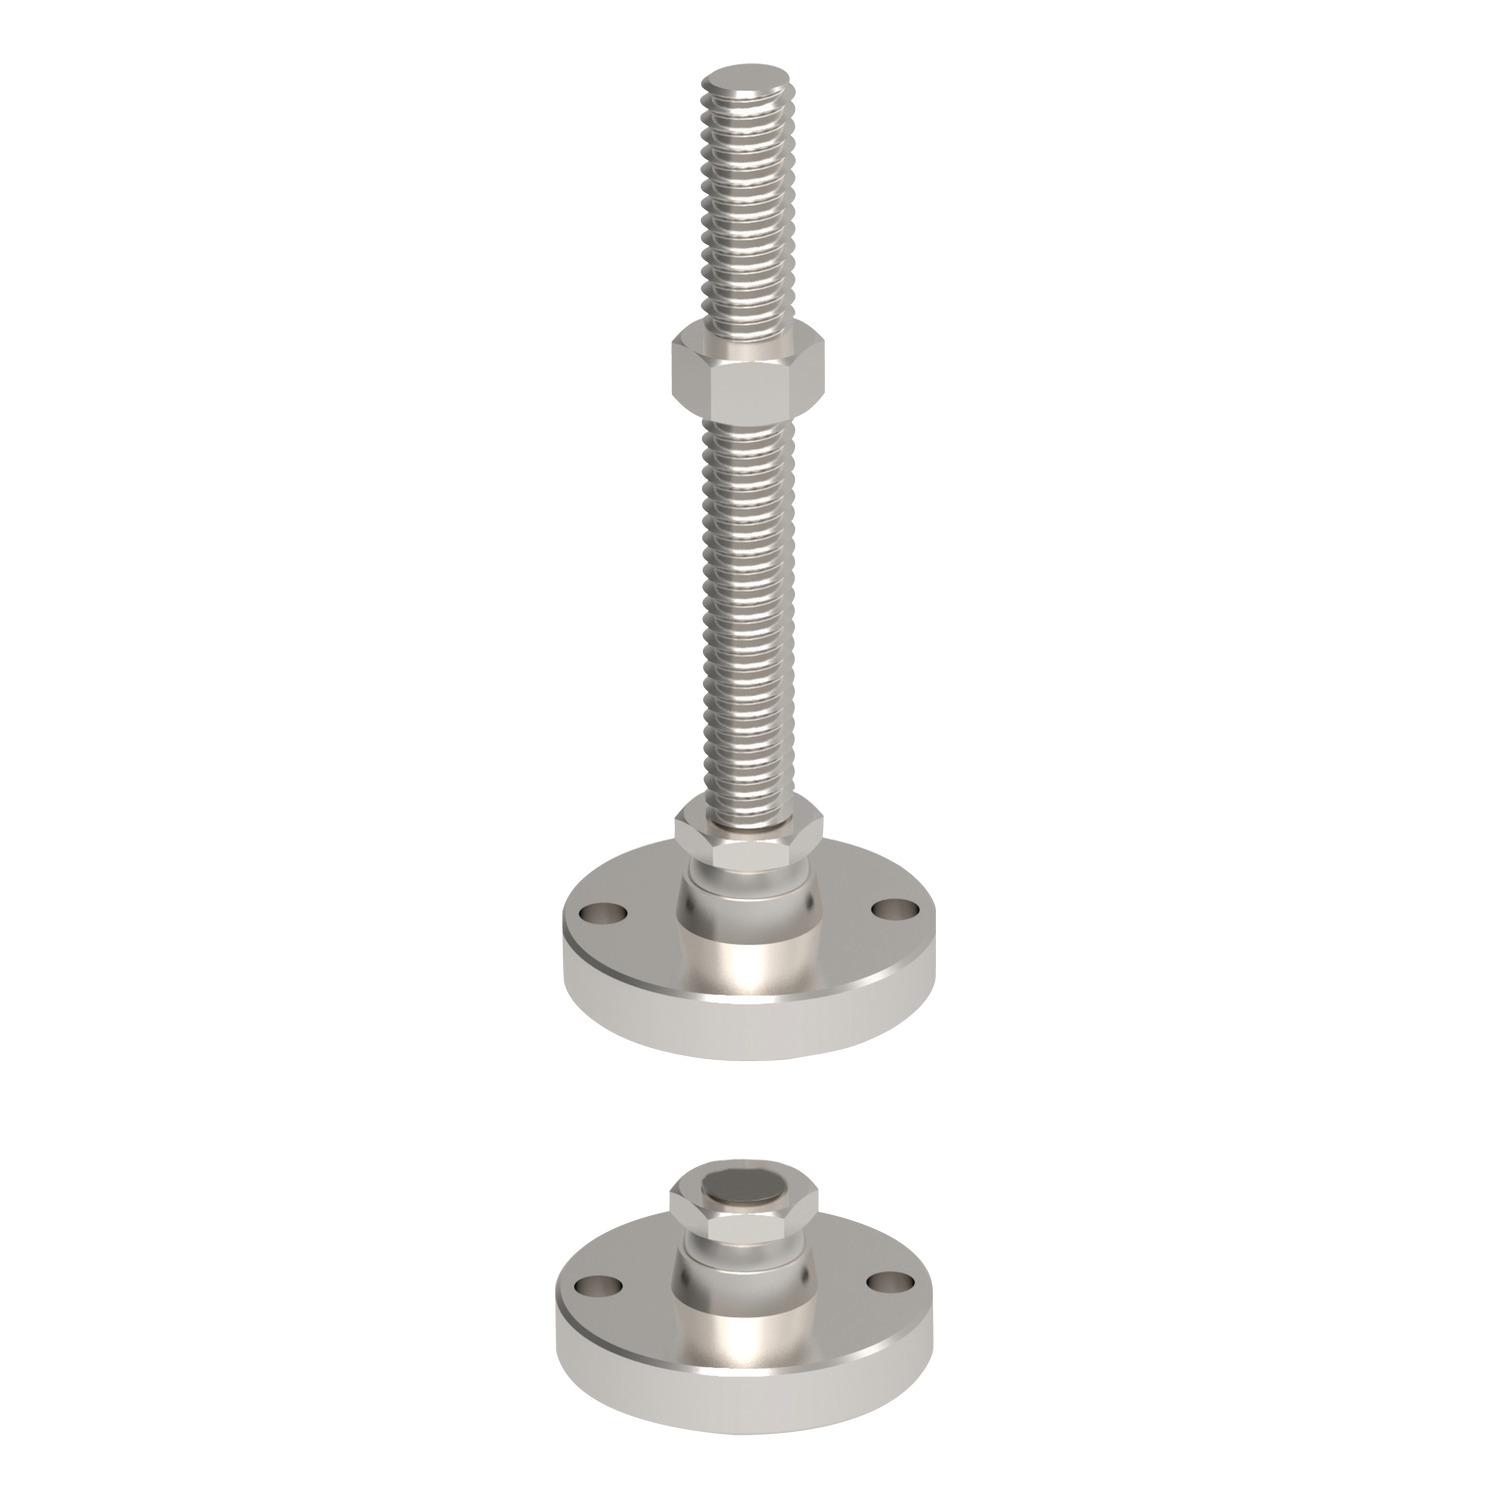 Product 34713, Levelling Feet - Bolt Down, Heavy Duty pad and bolt stainless steel / 